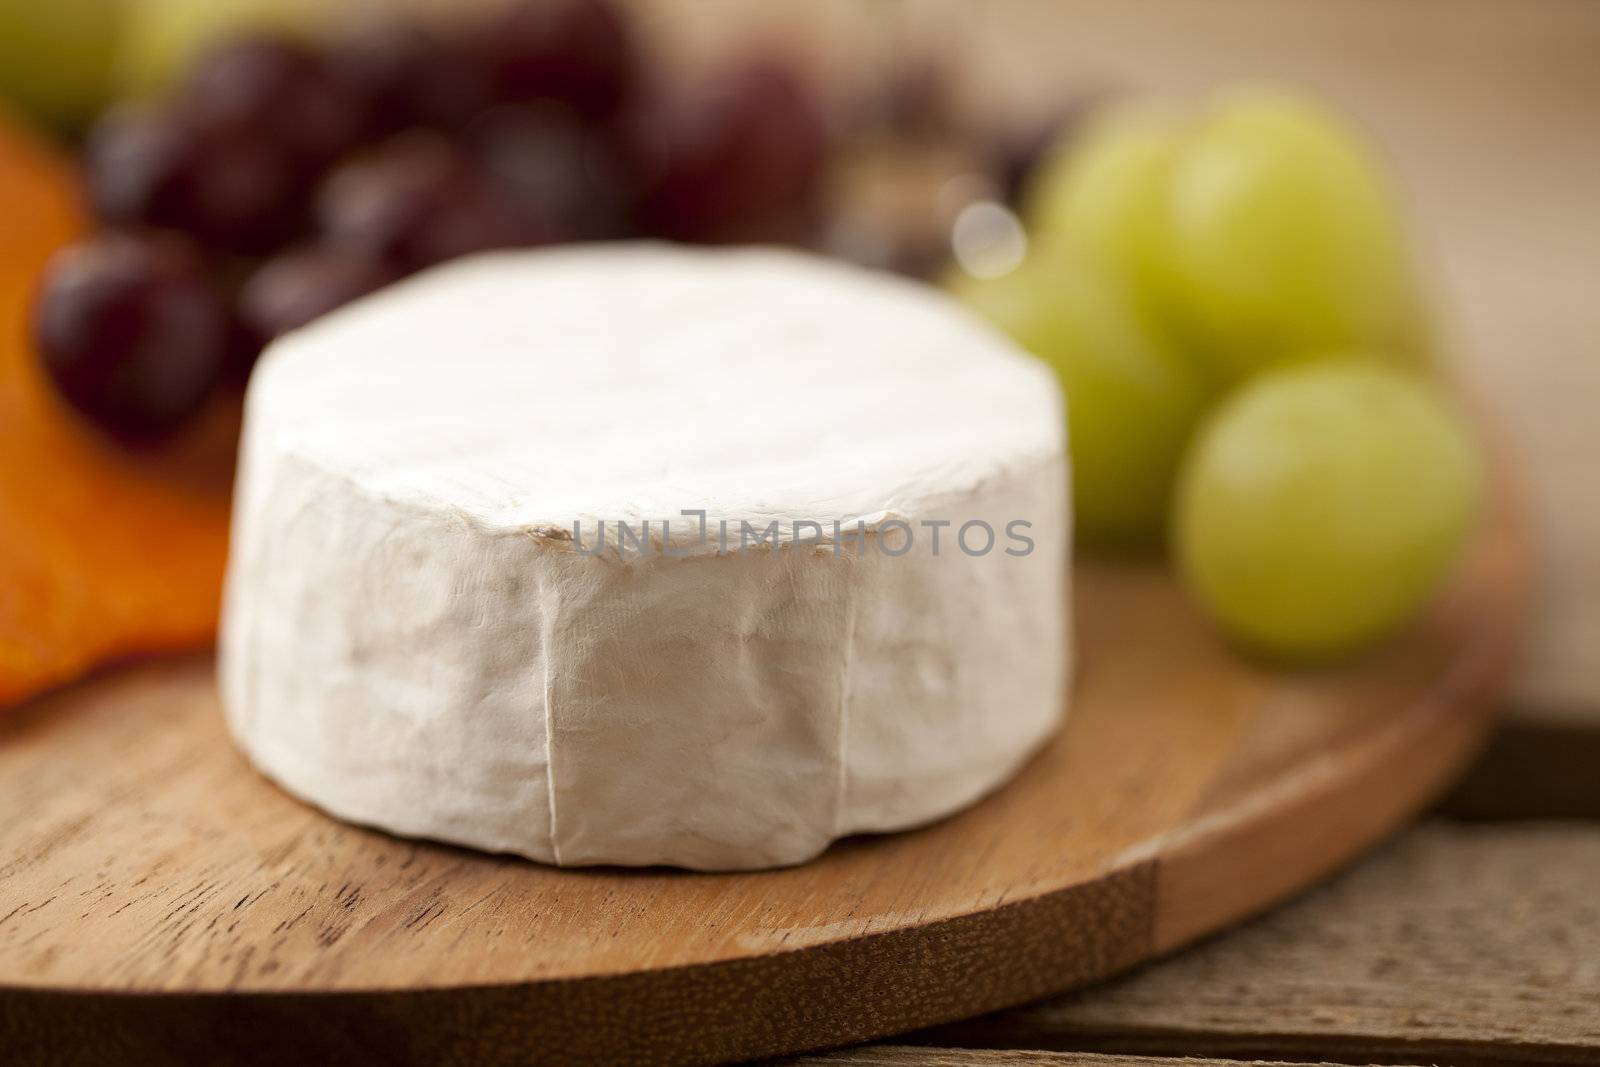 Feta cheese and grapes on a wooden board